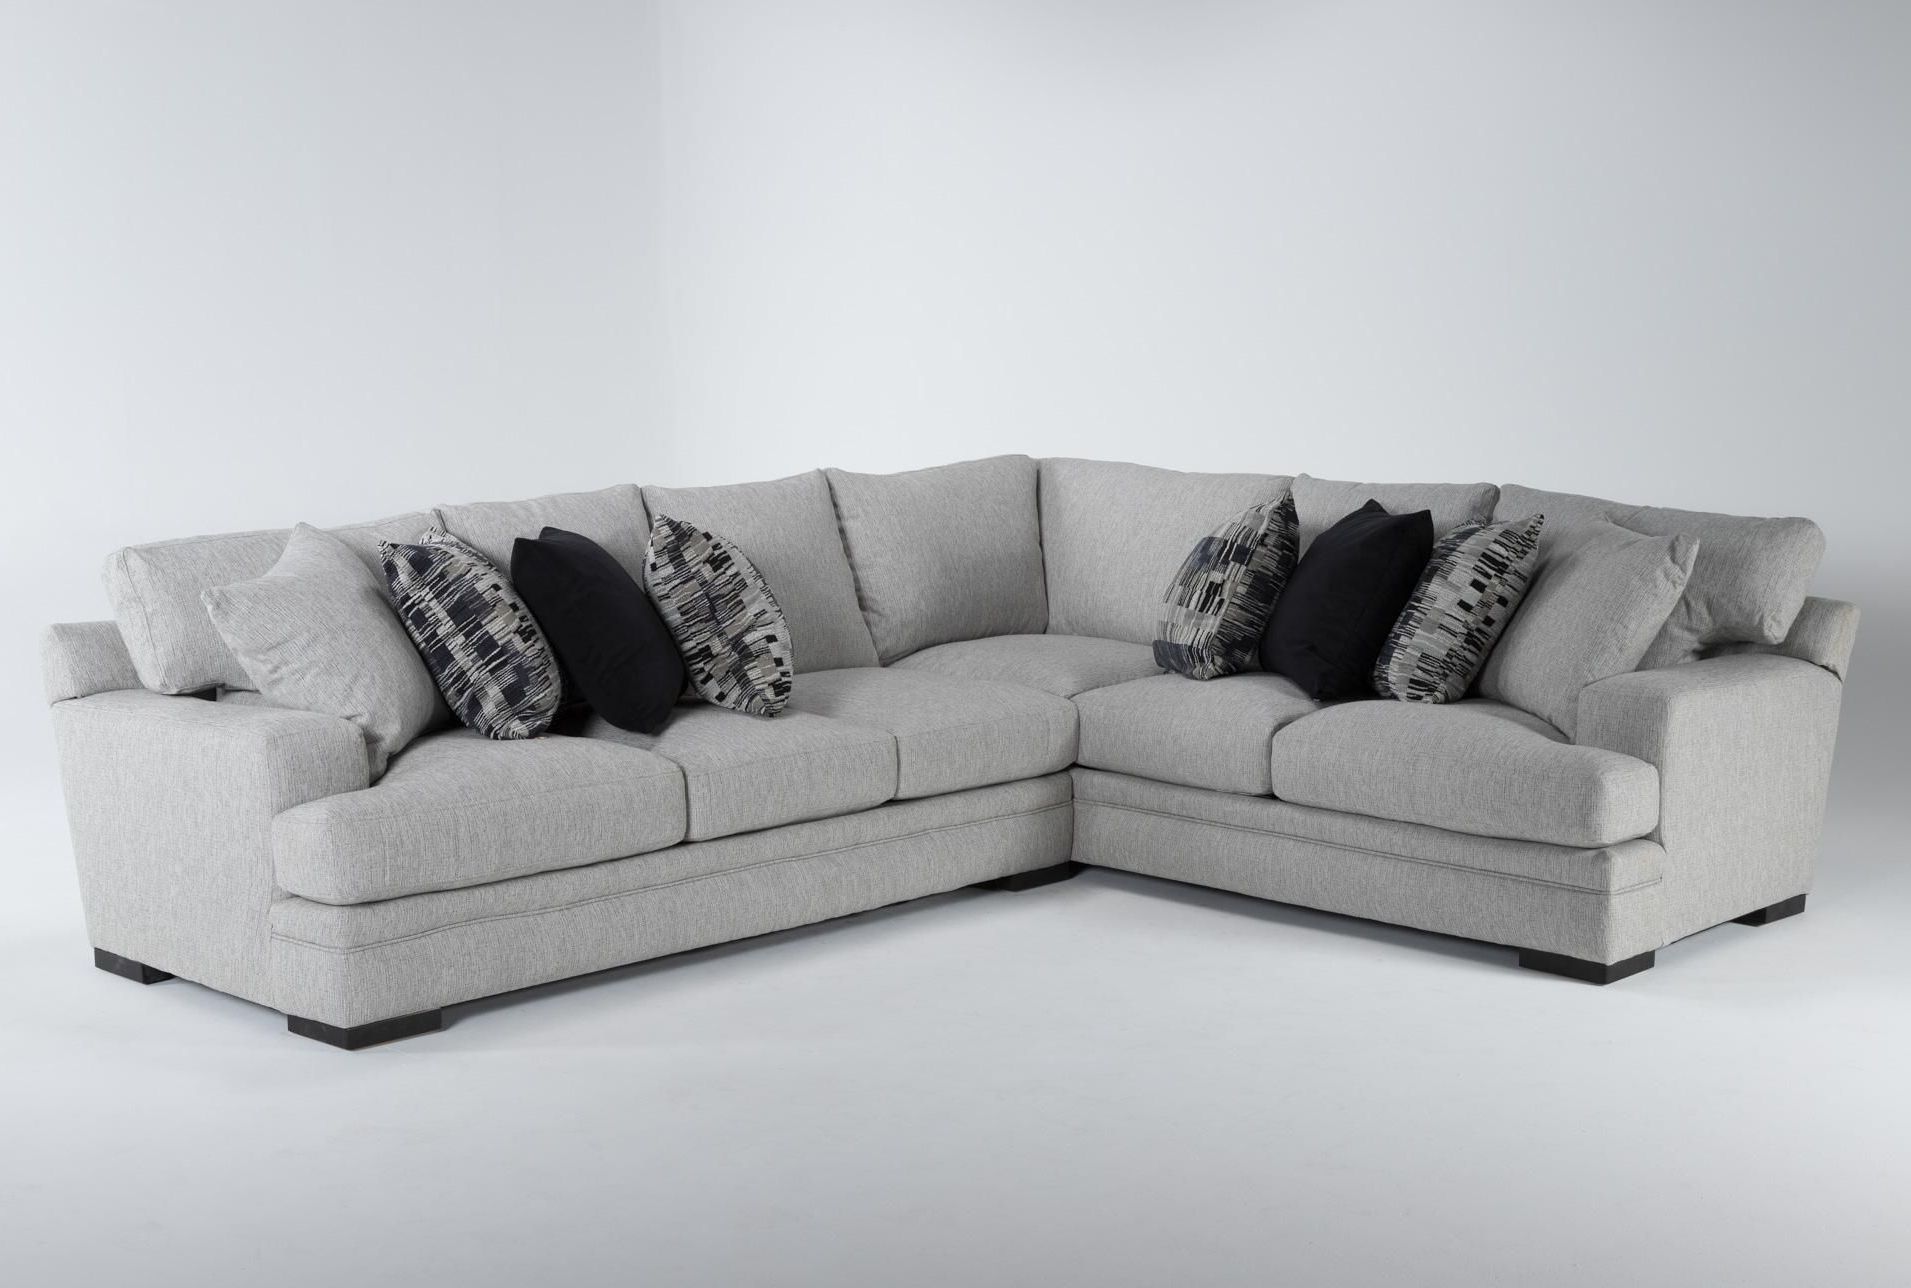 104" Sectional Sofas Regarding Fashionable Arlen Putty 2 Piece 104" Sectional With Right Arm Facing Sofa In  (View 10 of 15)